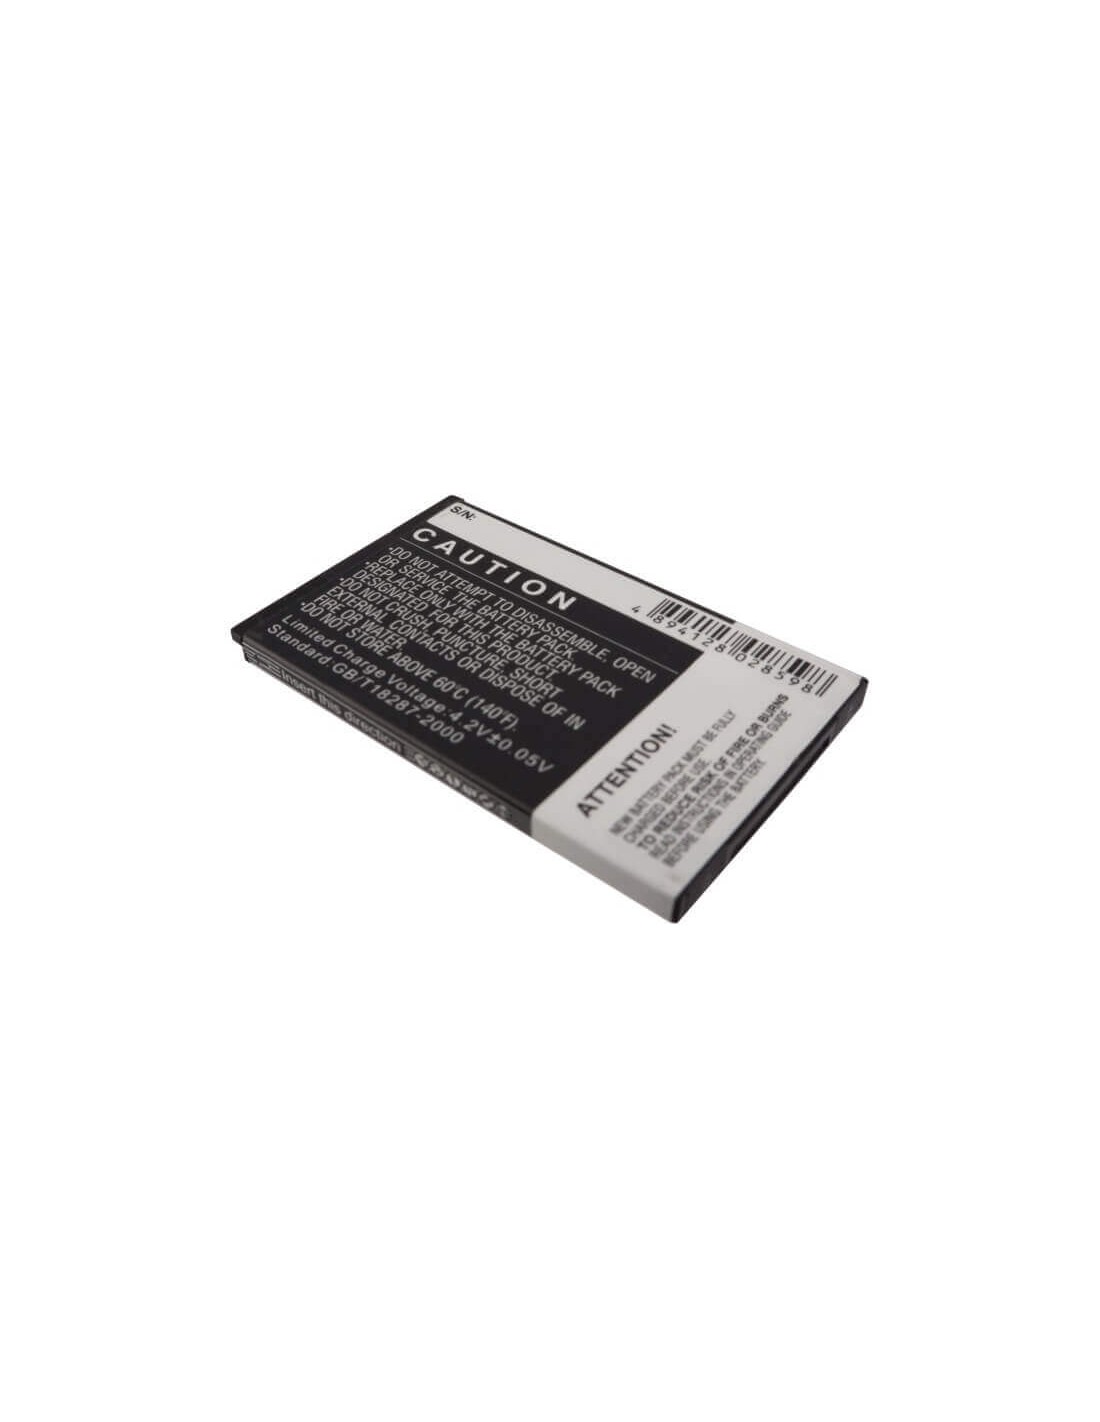 Battery for HTC Touch Diamond 2, Touch Diamond II, Topaz 100 3.7V, 1100mAh - 4.07Wh